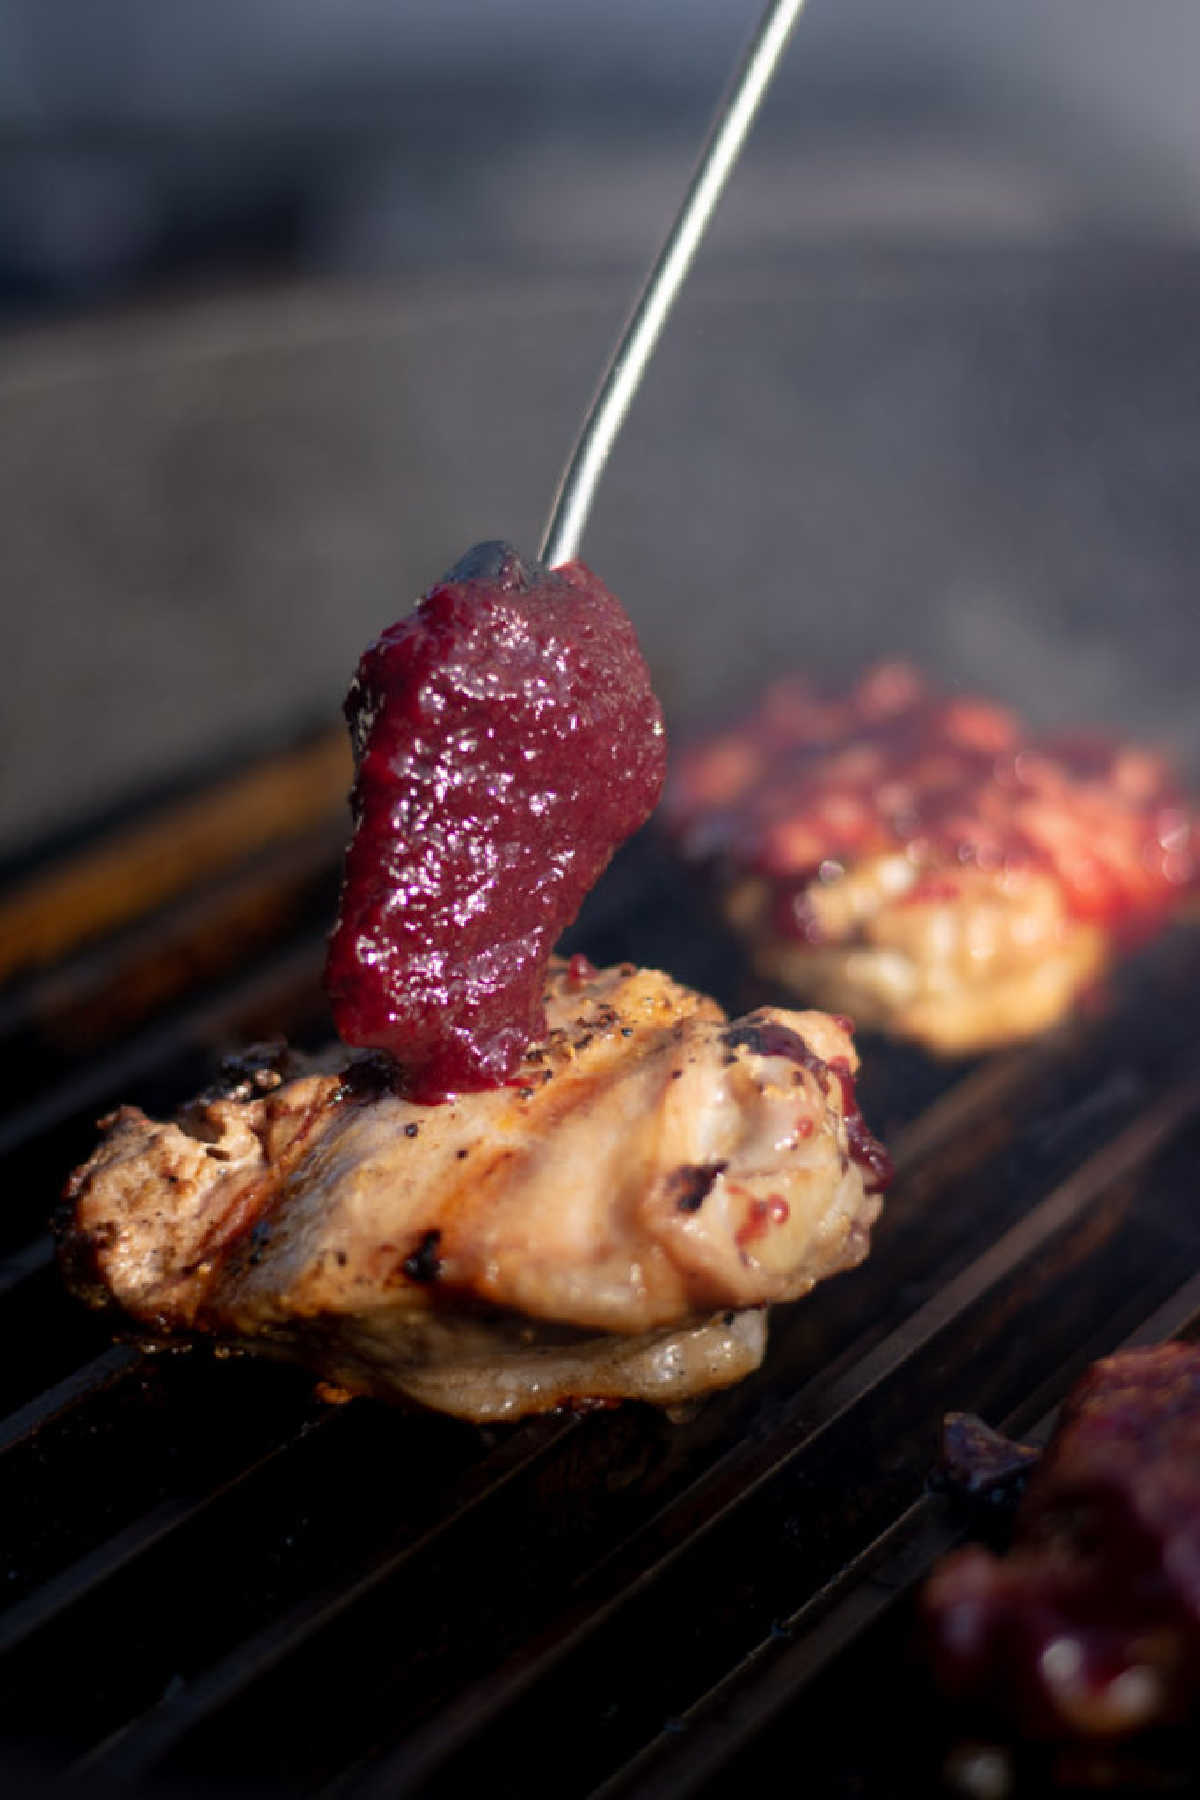 brushing on the homemade bourbon and cherry BBQ sauce on the grilled chicken.